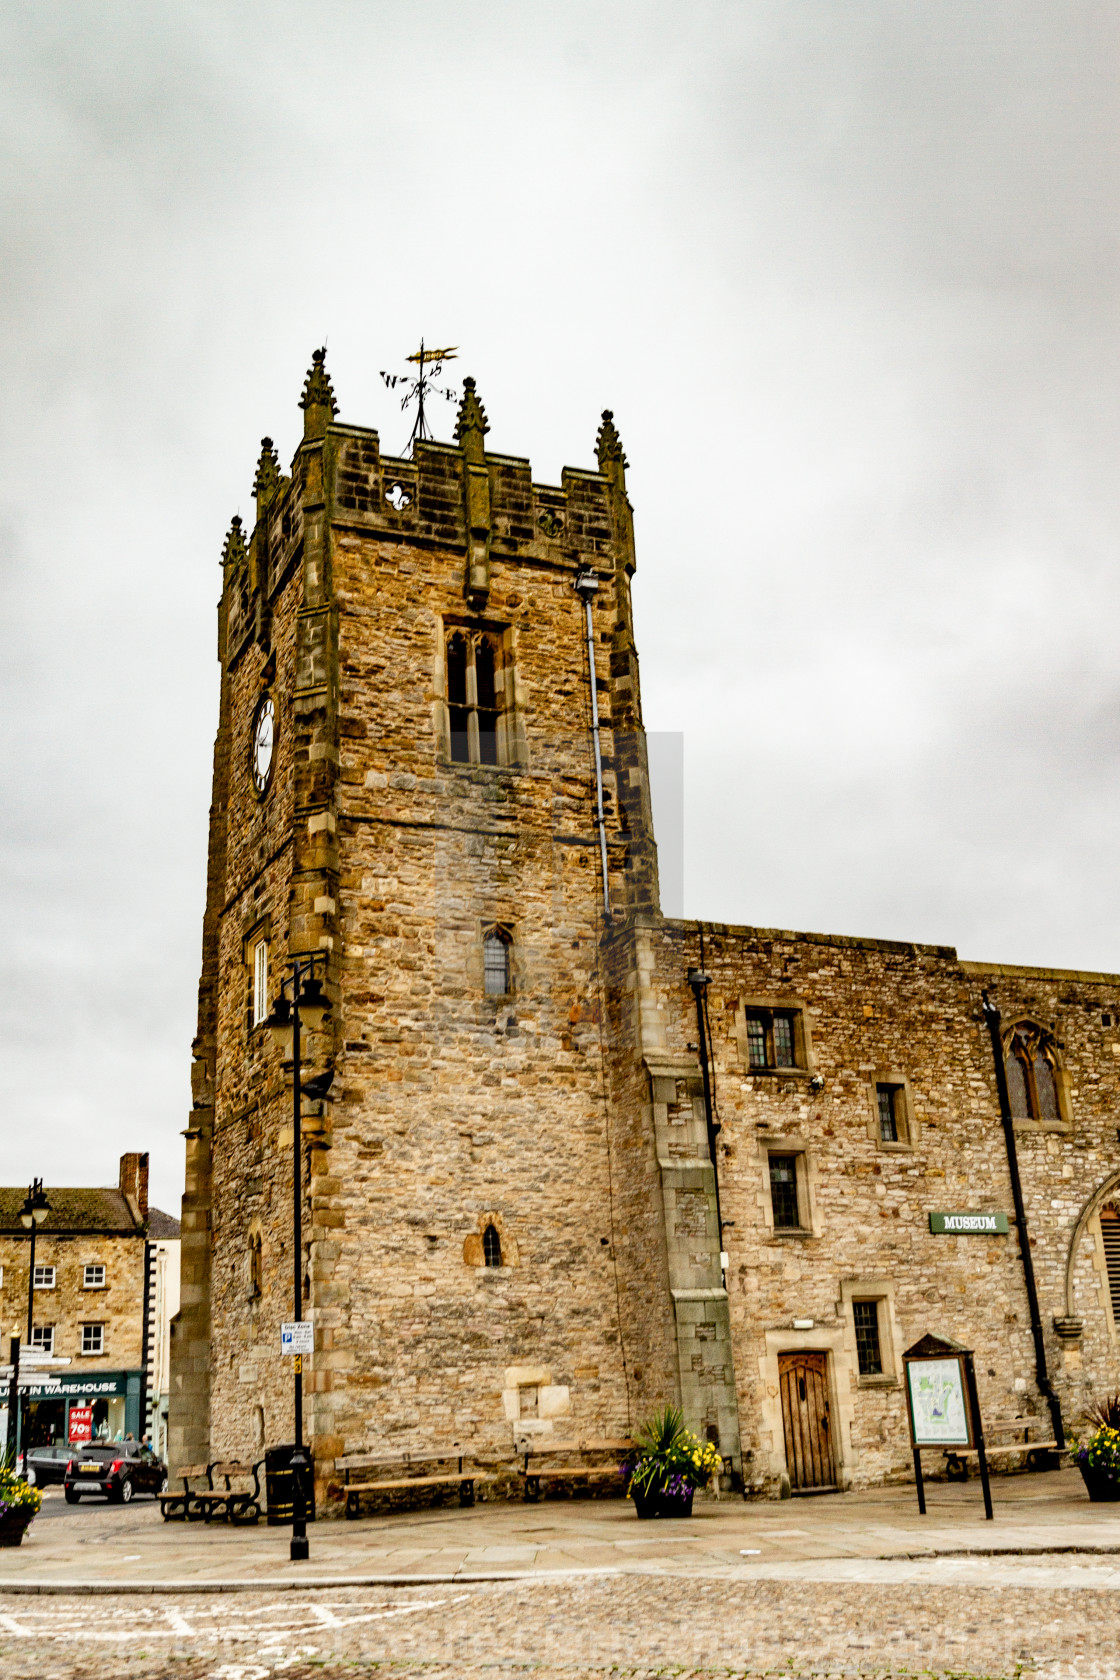 "Former Holy Trinity Church Tower, a grade 1 listed building in The Market Place, Richmond, North Yorkshire." stock image